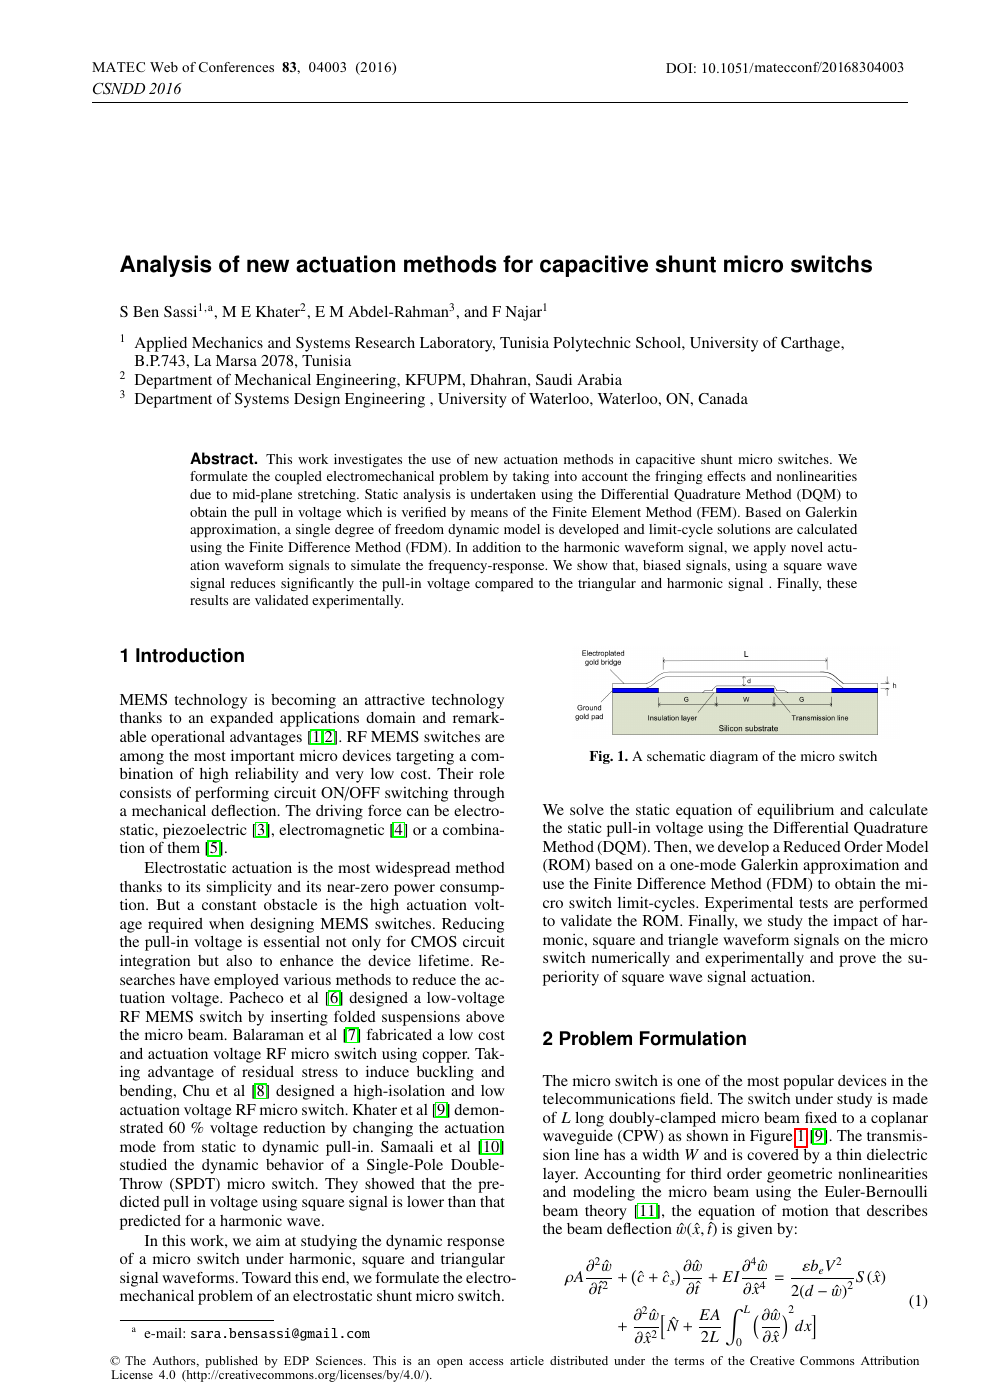 Analysis Of New Actuation Methods For Capacitive Shunt Micro Switchs Topic Of Research Paper In Materials Engineering Download Scholarly Article Pdf And Read For Free On Cyberleninka Open Science Hub